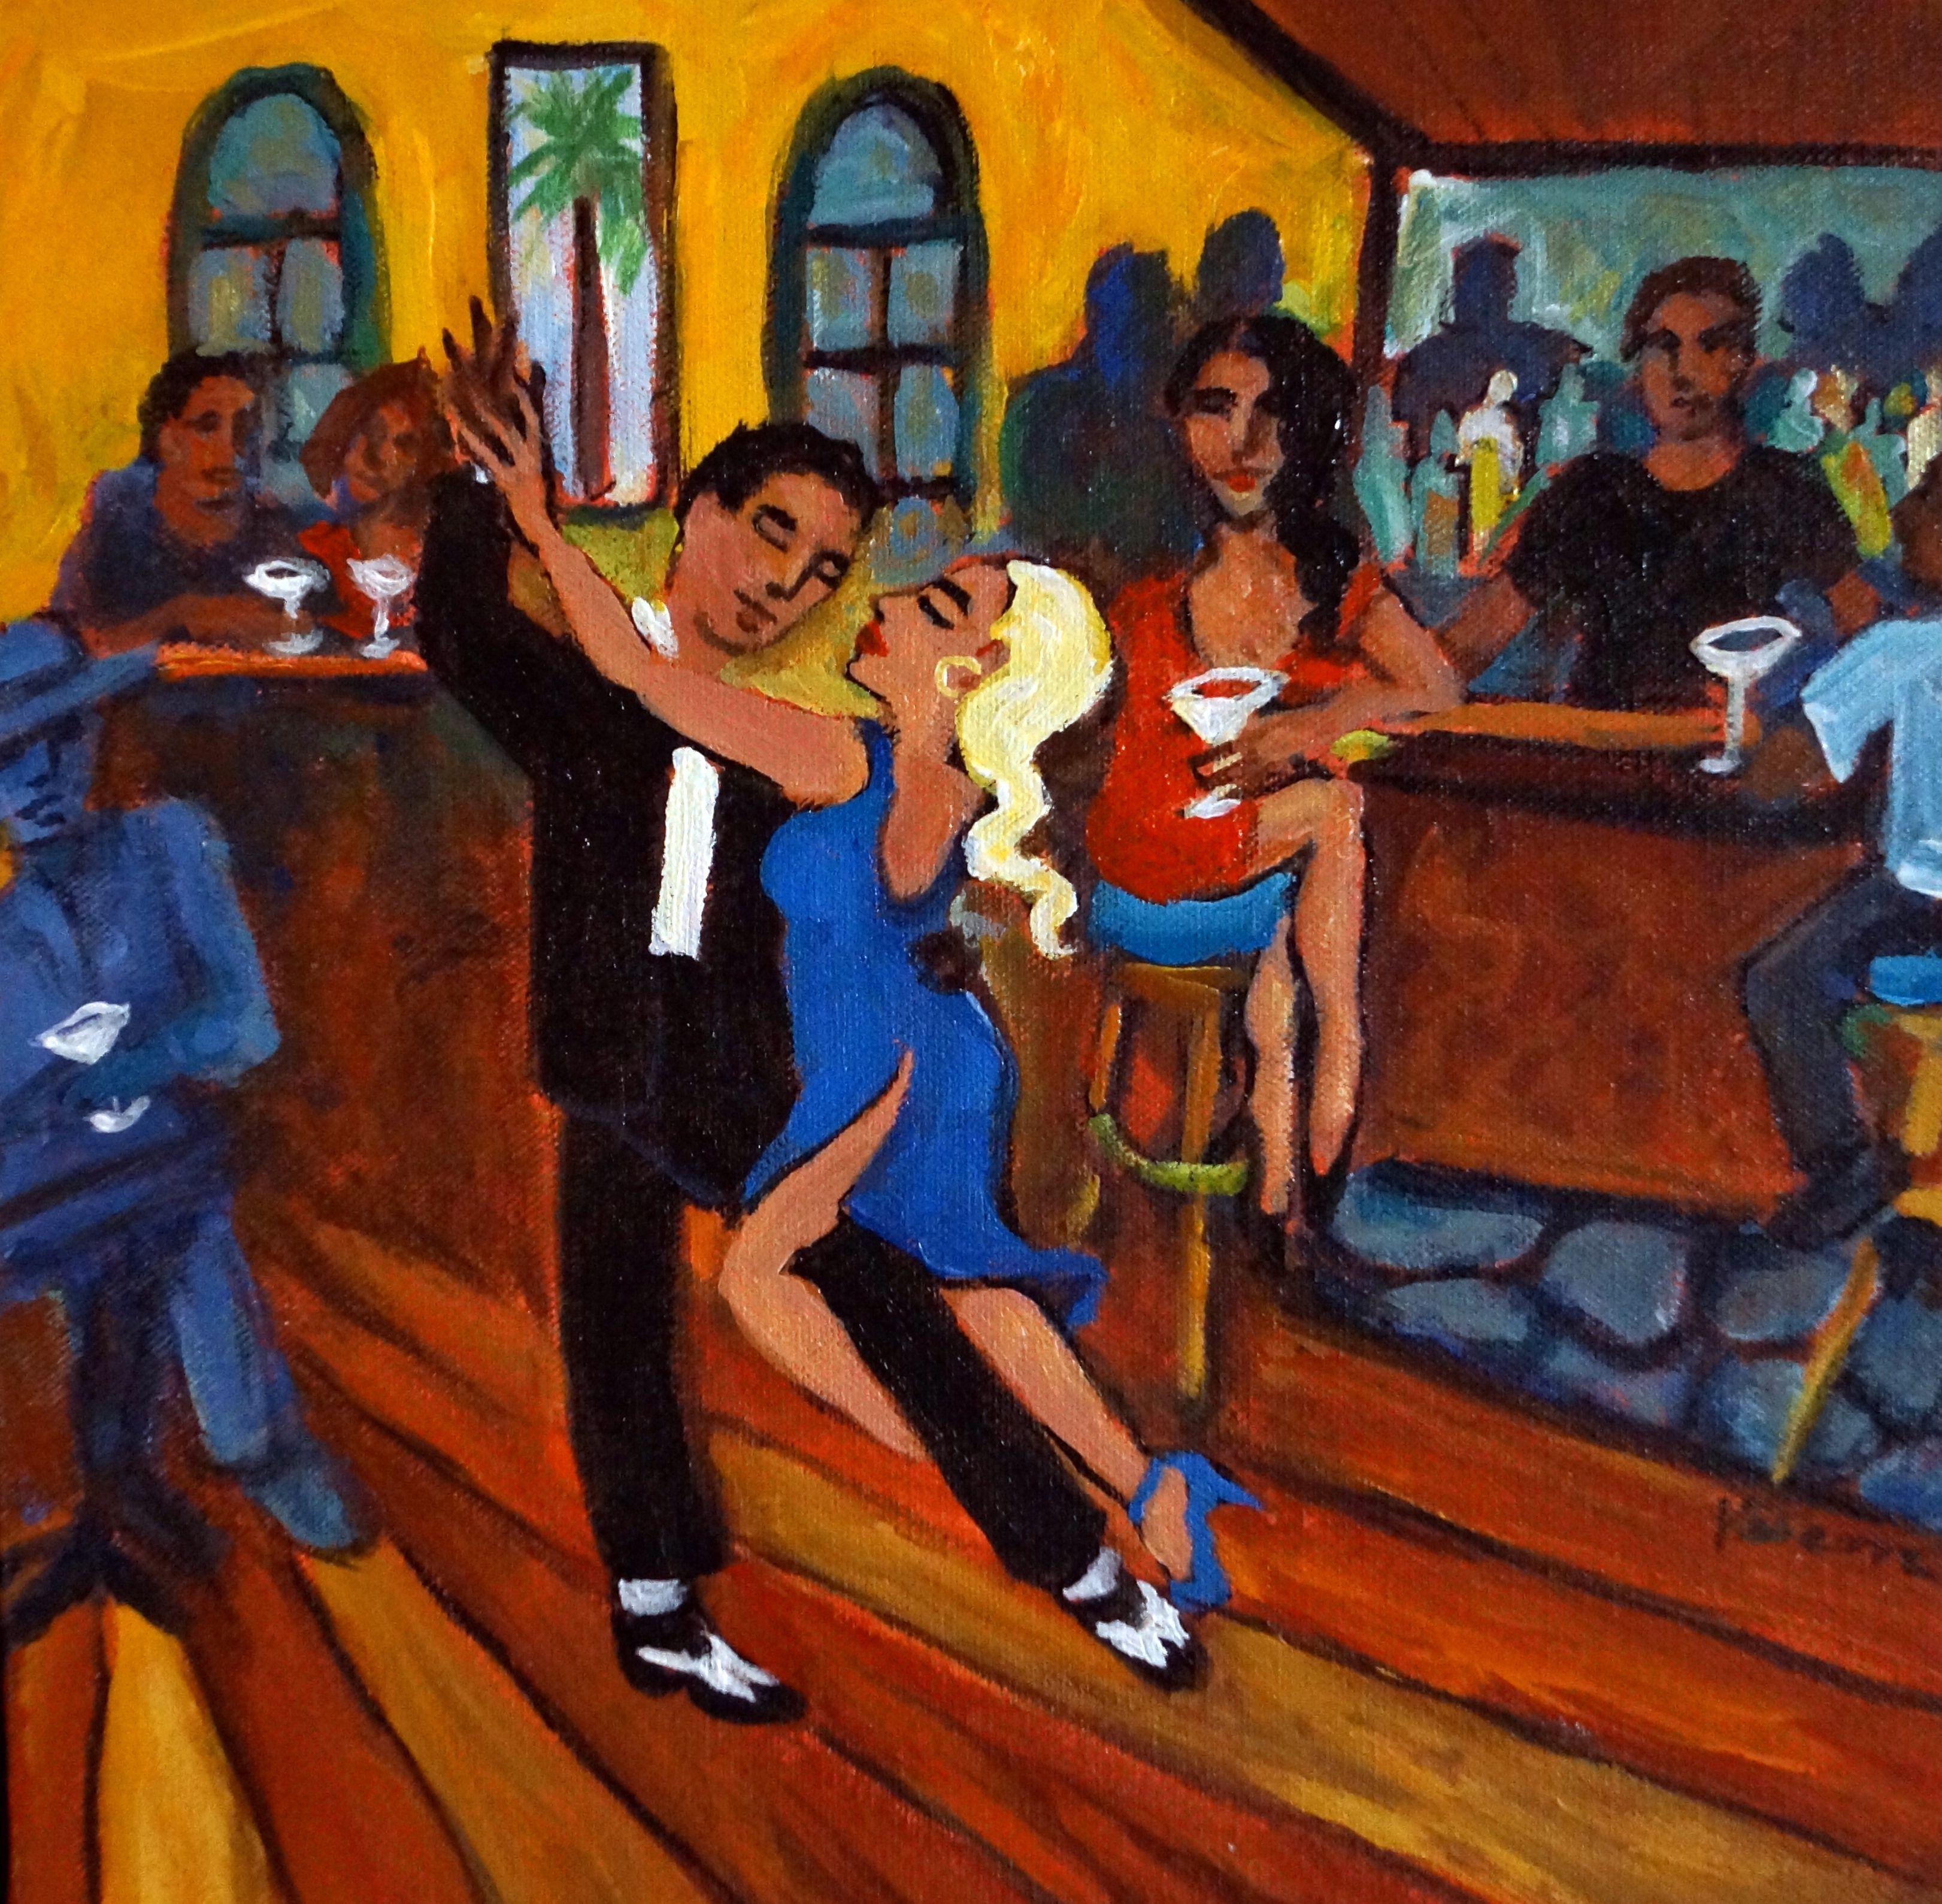 This is a place I used to paint in the 90's called Cafe Tu Tu Tango, I have to revisit it occasionally because I love the look of the place and the vibe was so good. They hired artists and all sorts of entertainers, like tango dancers, belly